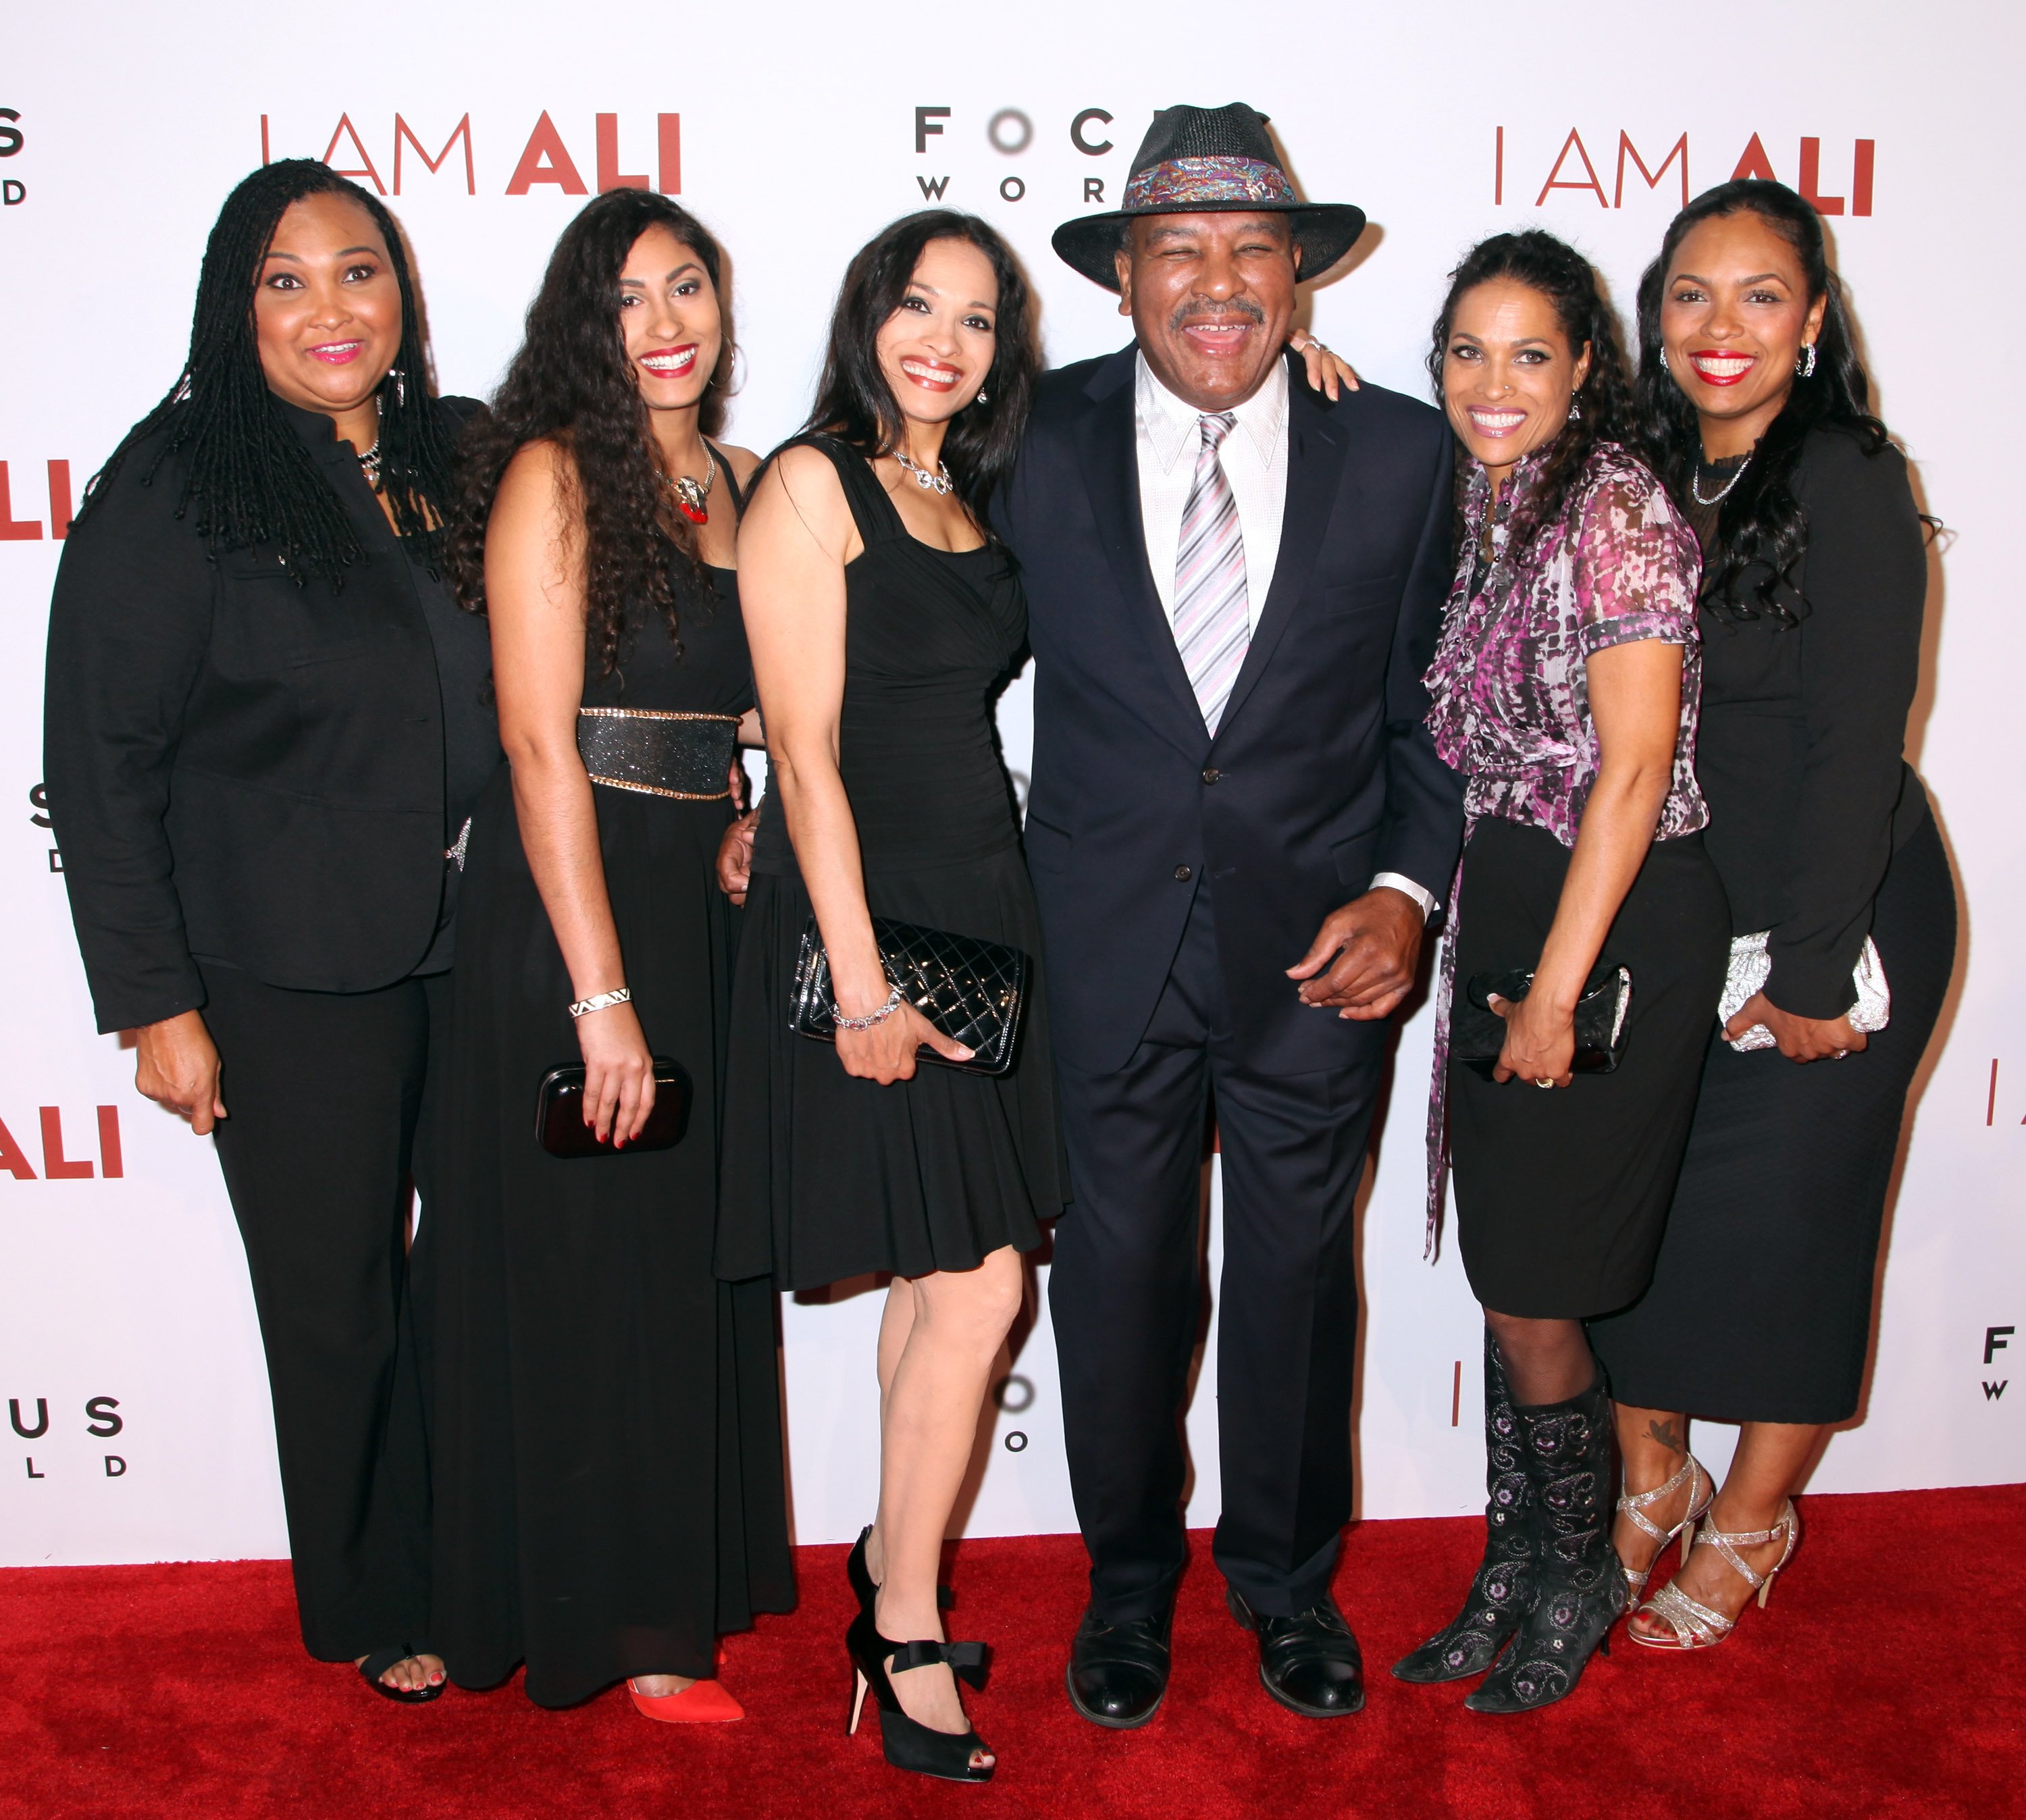 Maryum Ali, Guest, Rasheda Ali-Walsh, Rahman Ali, Jamillah Ali-Joyce and Hana Ali pose on the red carpet as they arrive at the Los Angeles premiere of Focus World's "I Am Ali" at ArcLight Hollywood on October 8, 2014, in Hollywood | Source: Getty Images